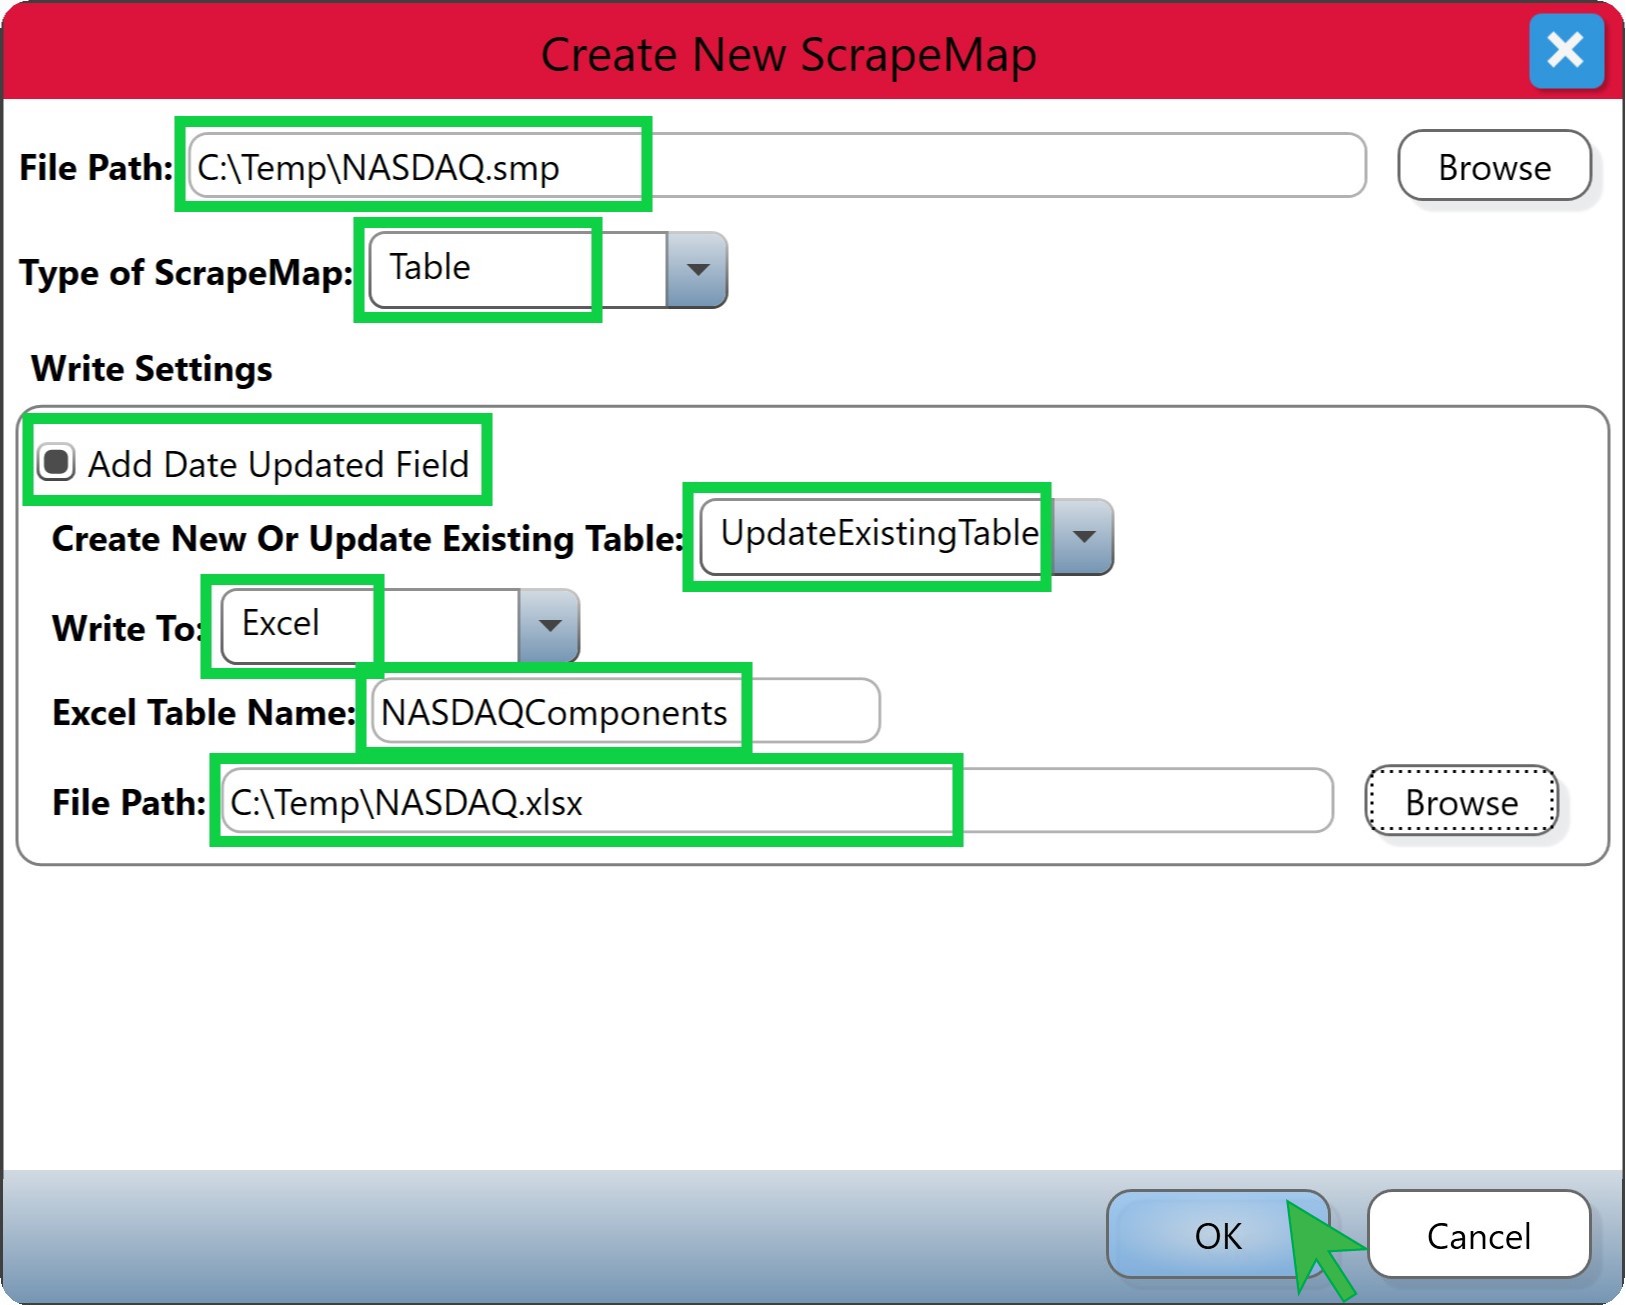 Create New ScrapeMap Dialog with various data highlighted